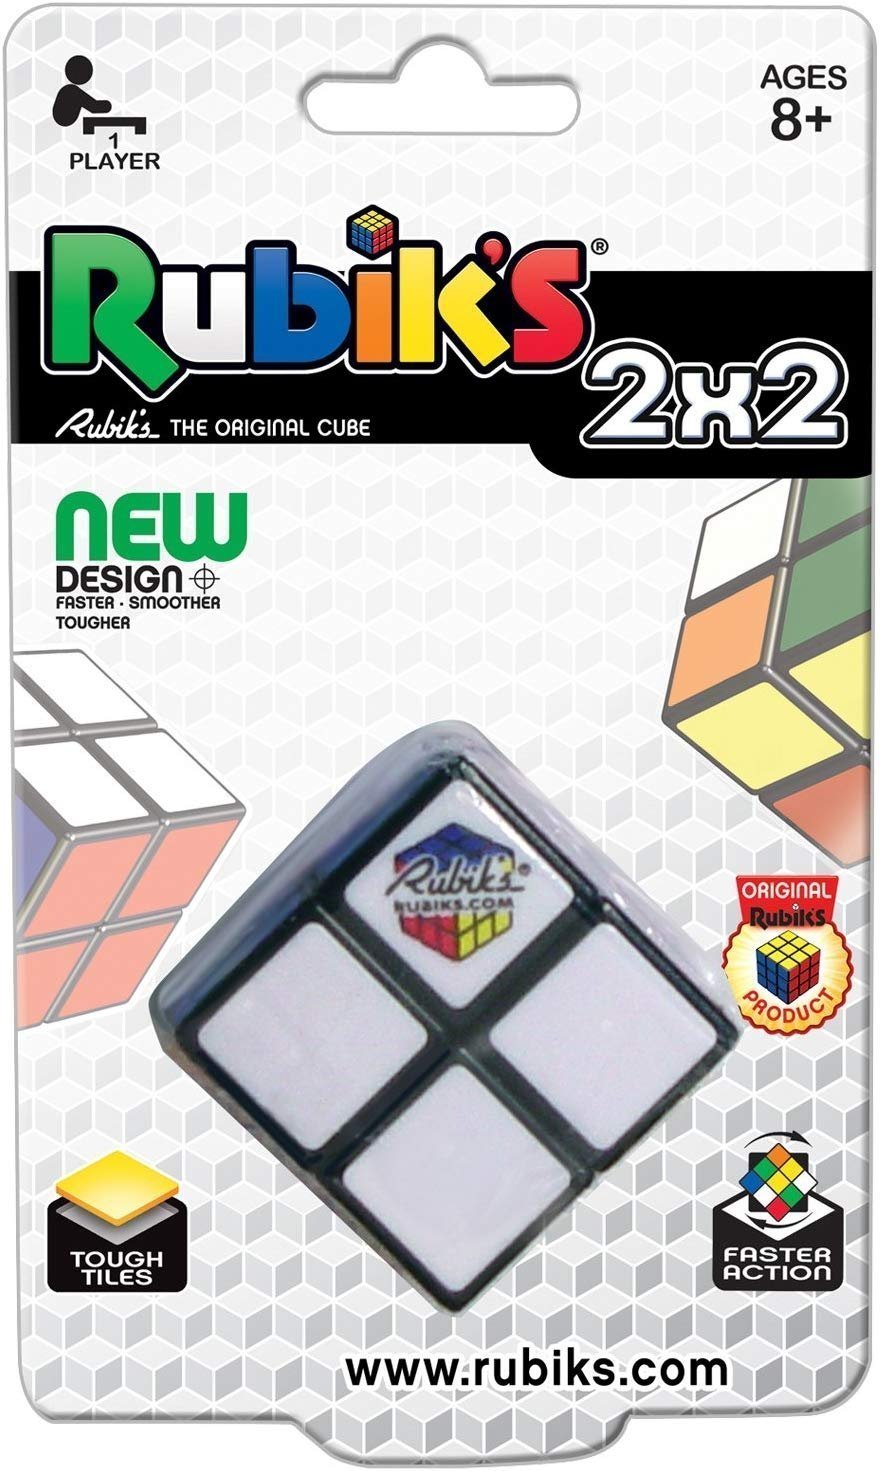 original rubiks cube factory error? Hi, I bought 2 original rubiks cubes to  display at my home gameroom and my work office. I wanted to ask if anyone  knows if the factory